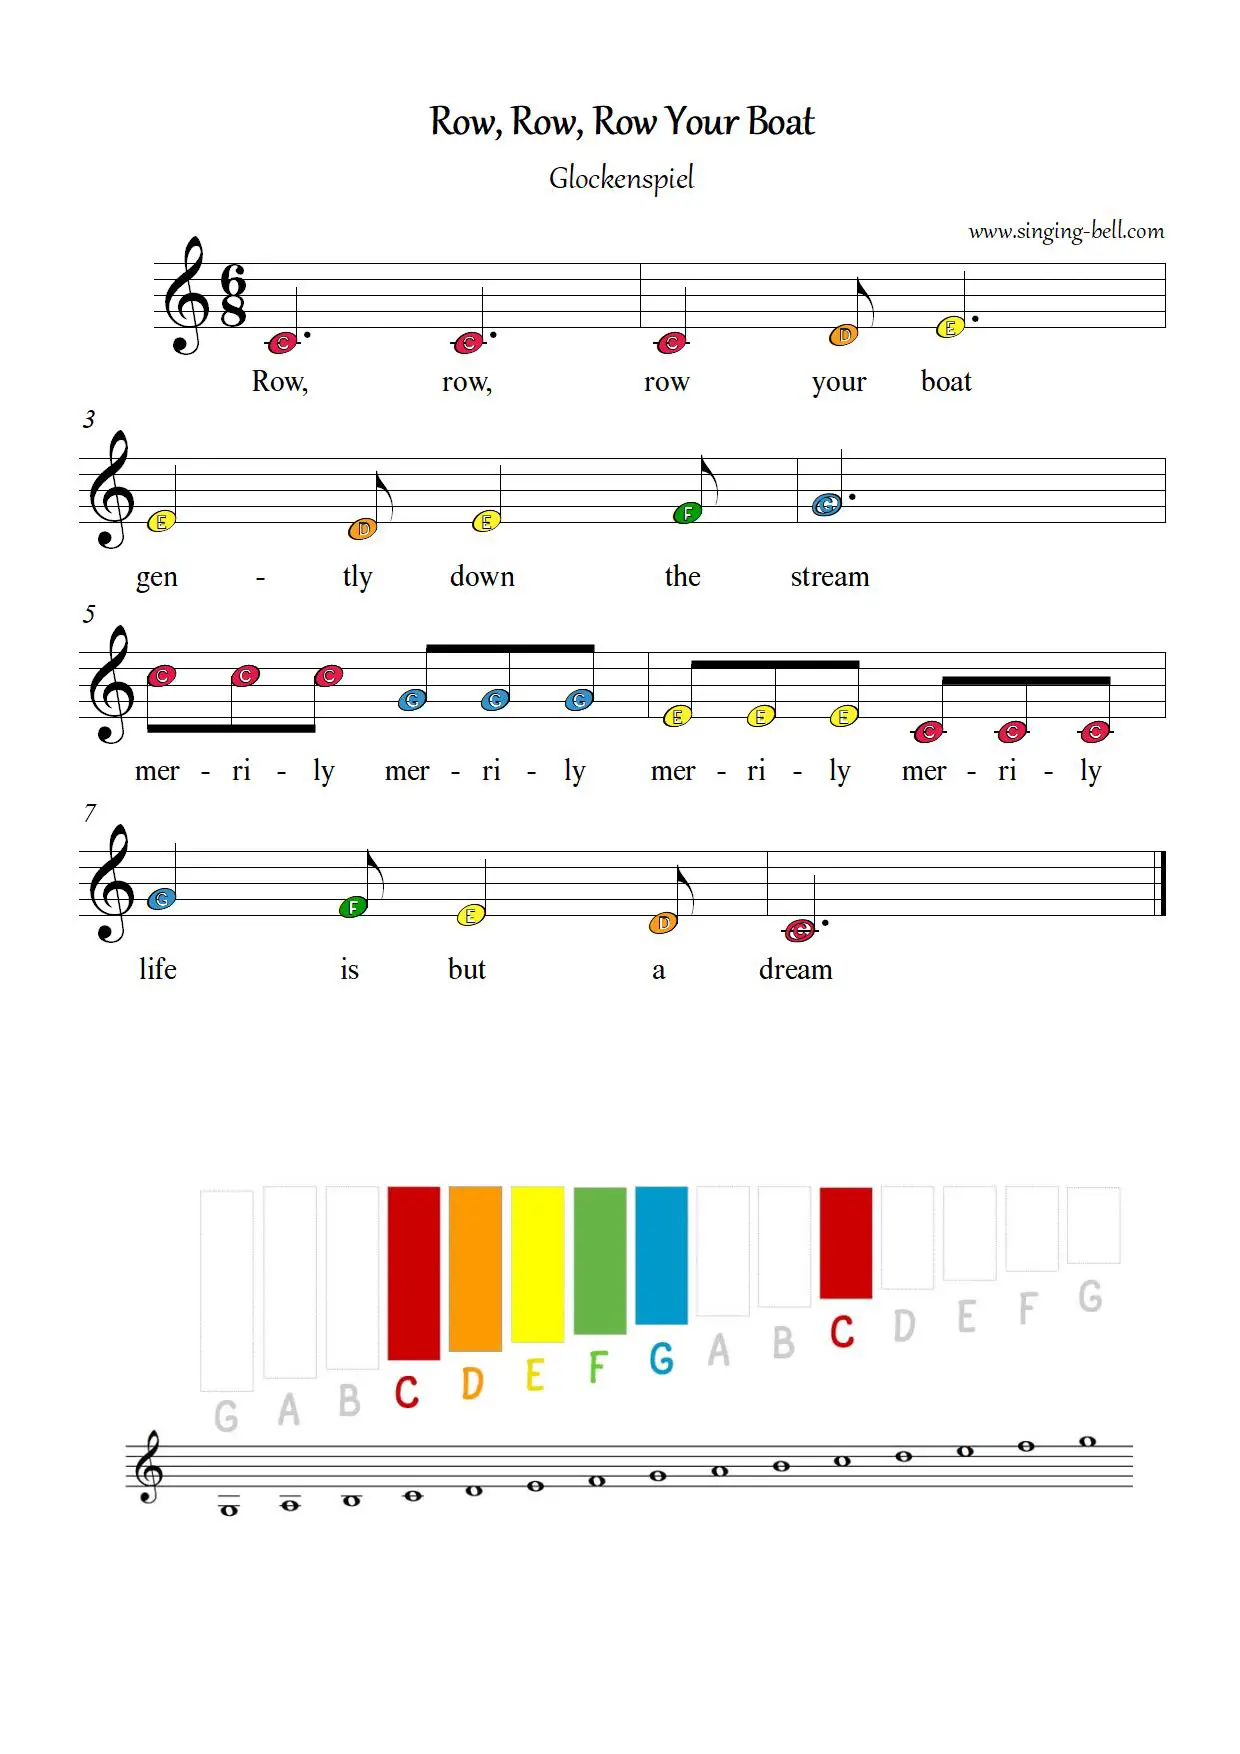 Row row row your boat free xylophone glockenspiel sheet music color notes chart pdf